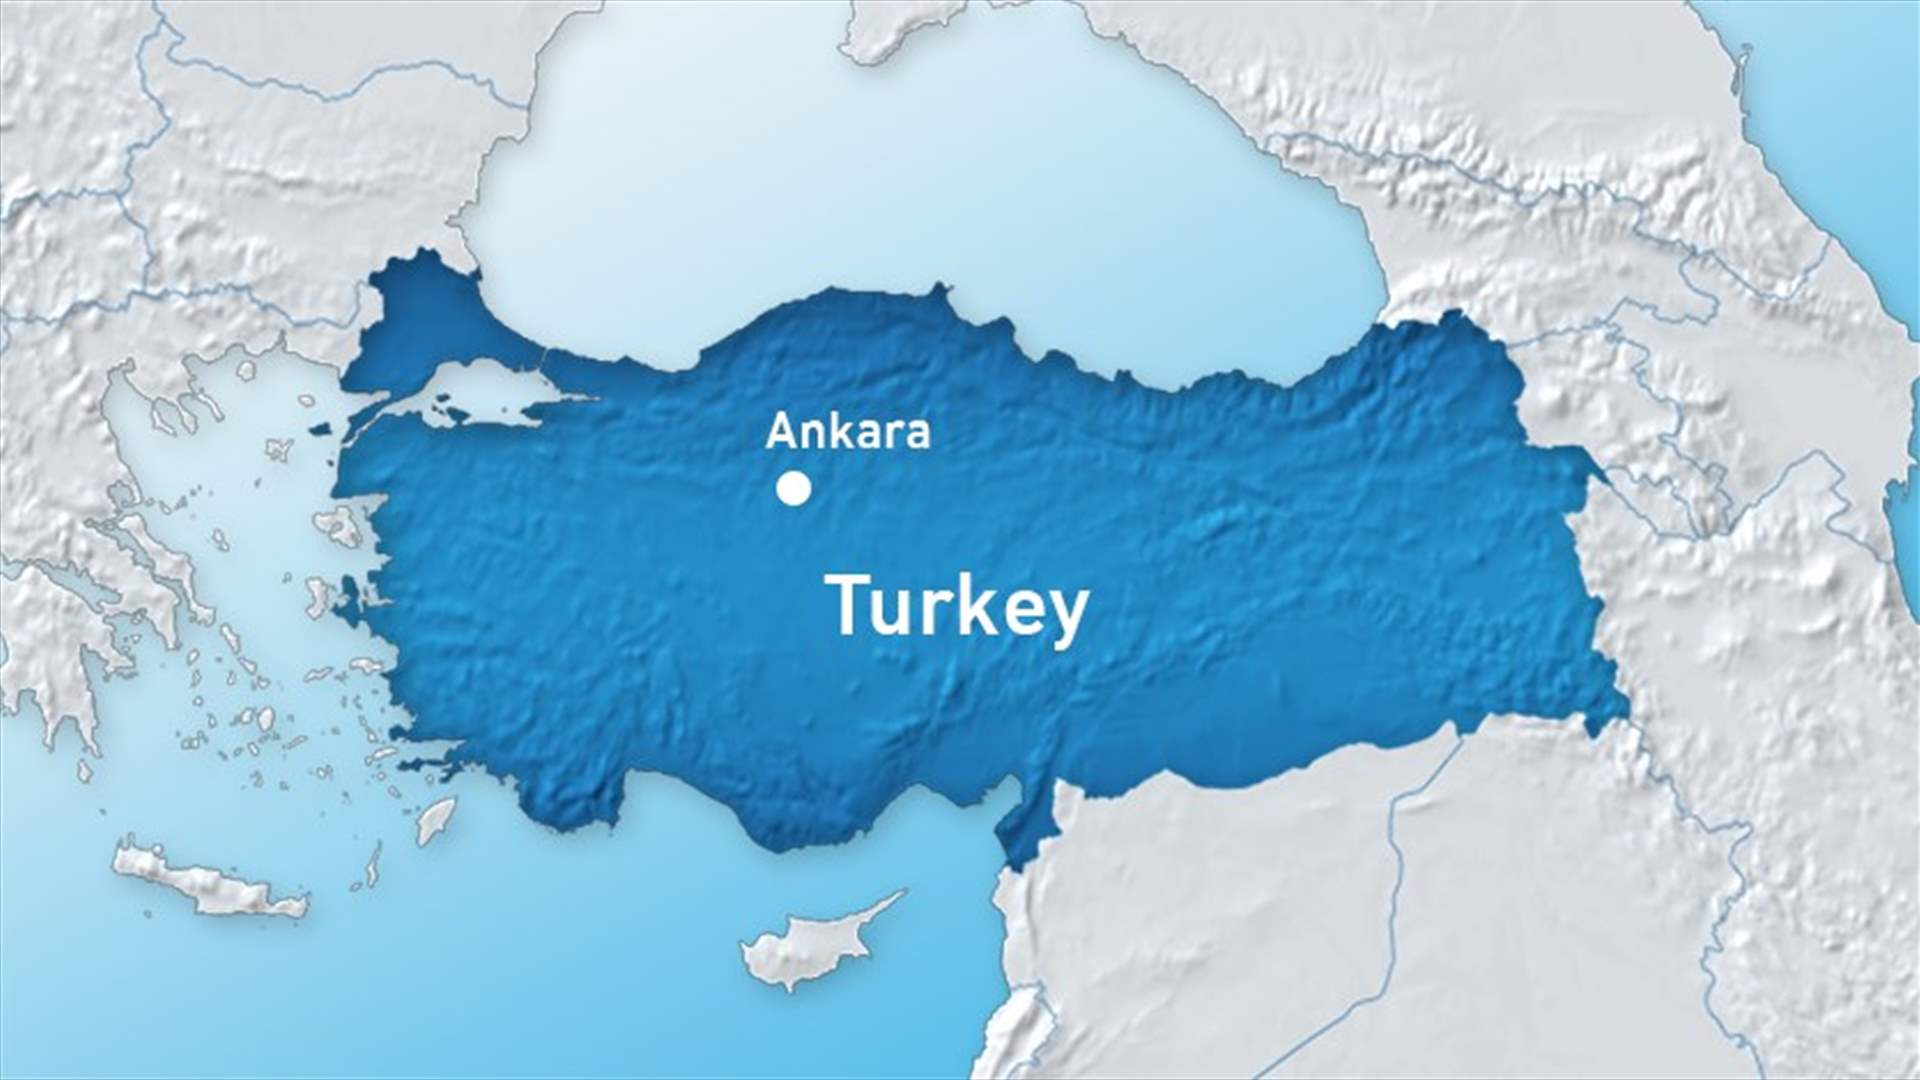 Roadside bomb kills two police in southeast Turkey - security sources